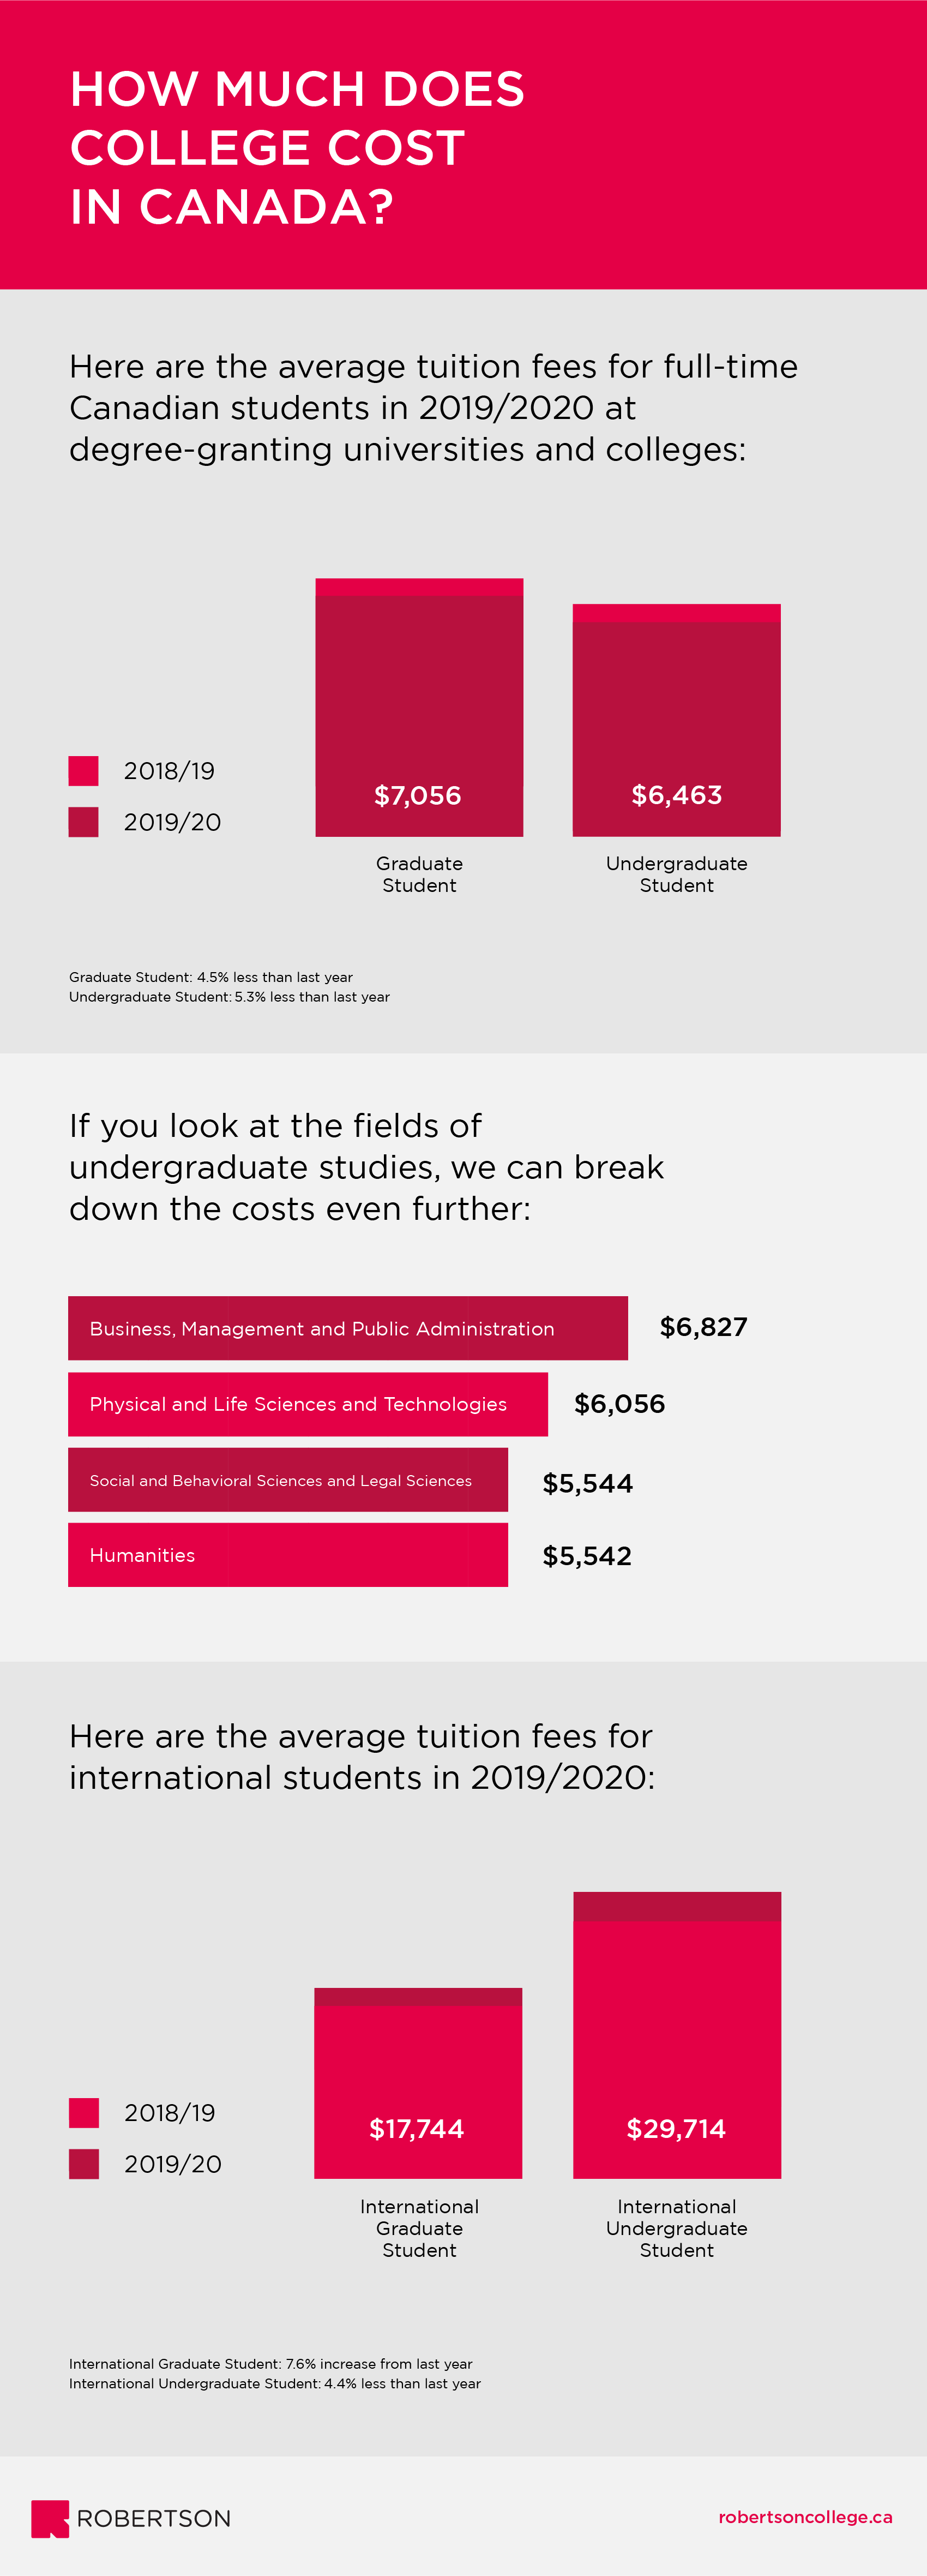 How Much Does College Cost in Canada 2020 - Infographic